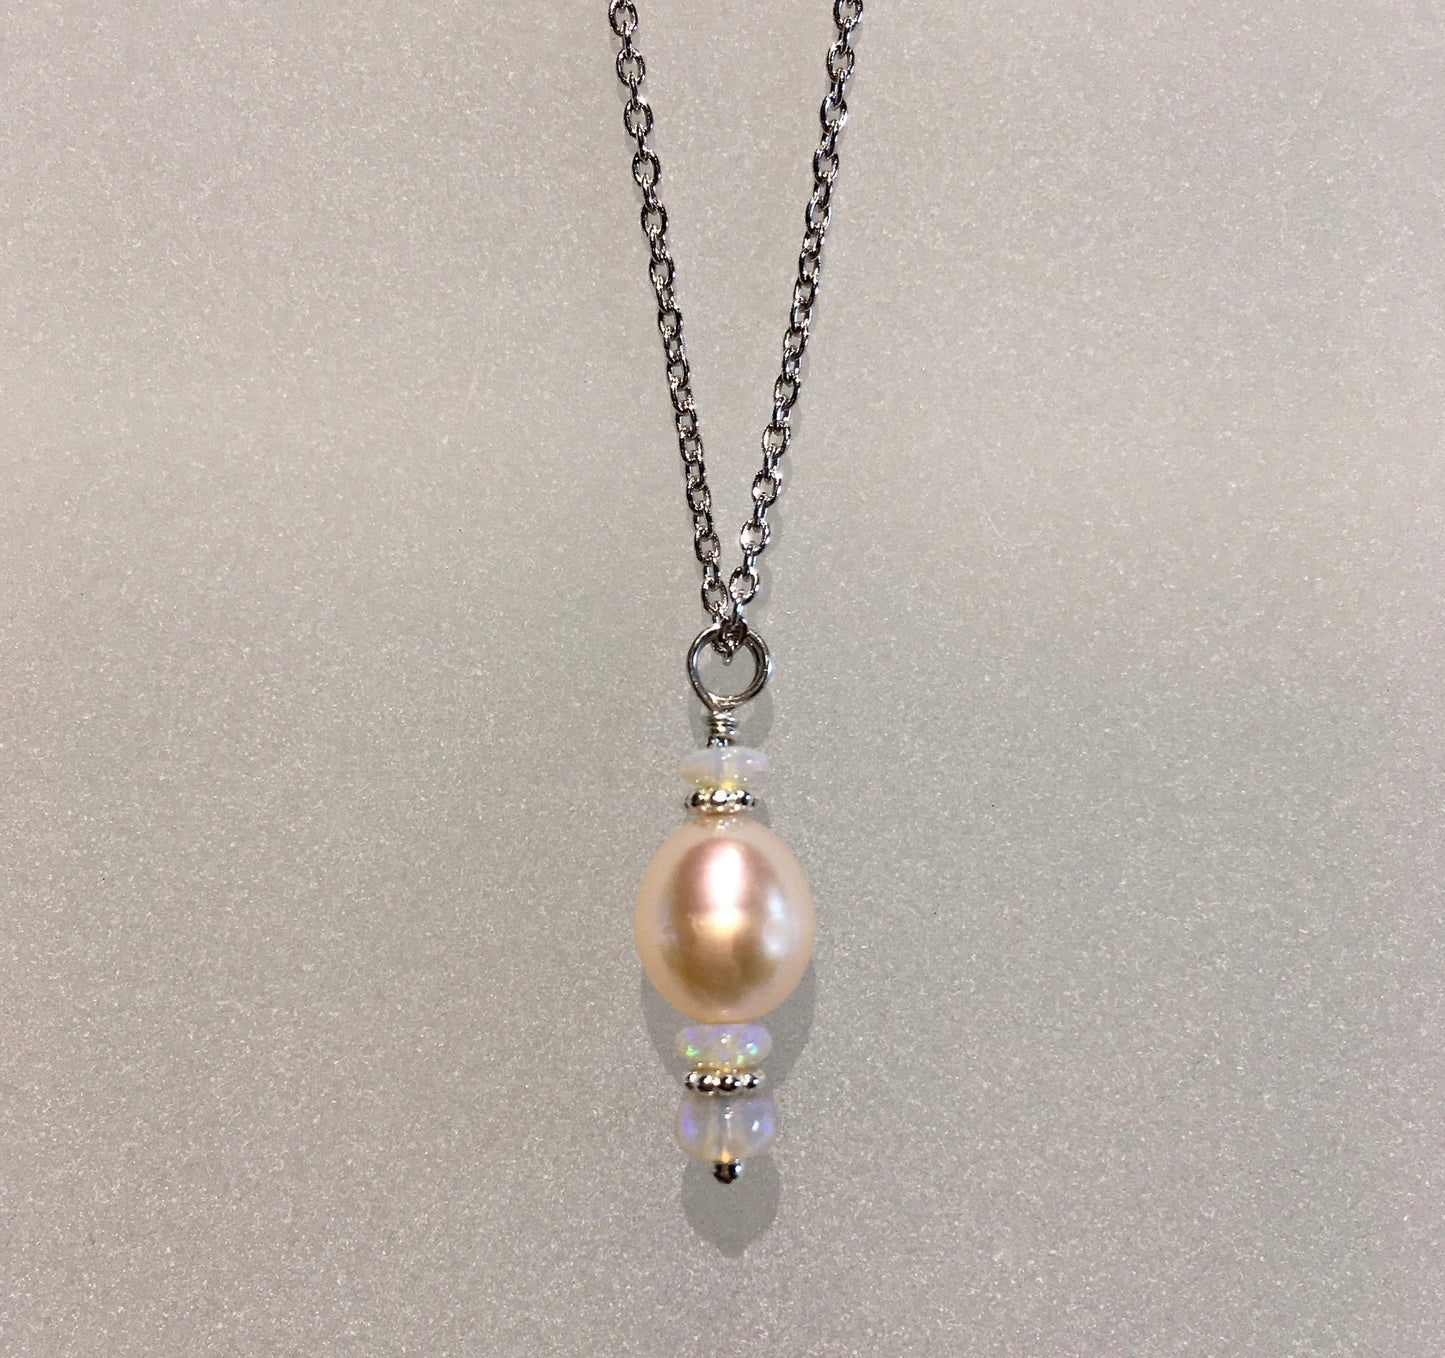 Peach Cultured Pearl & Opal Drop Pendant by Arpaia Jewelry on 18" Sterling Chain